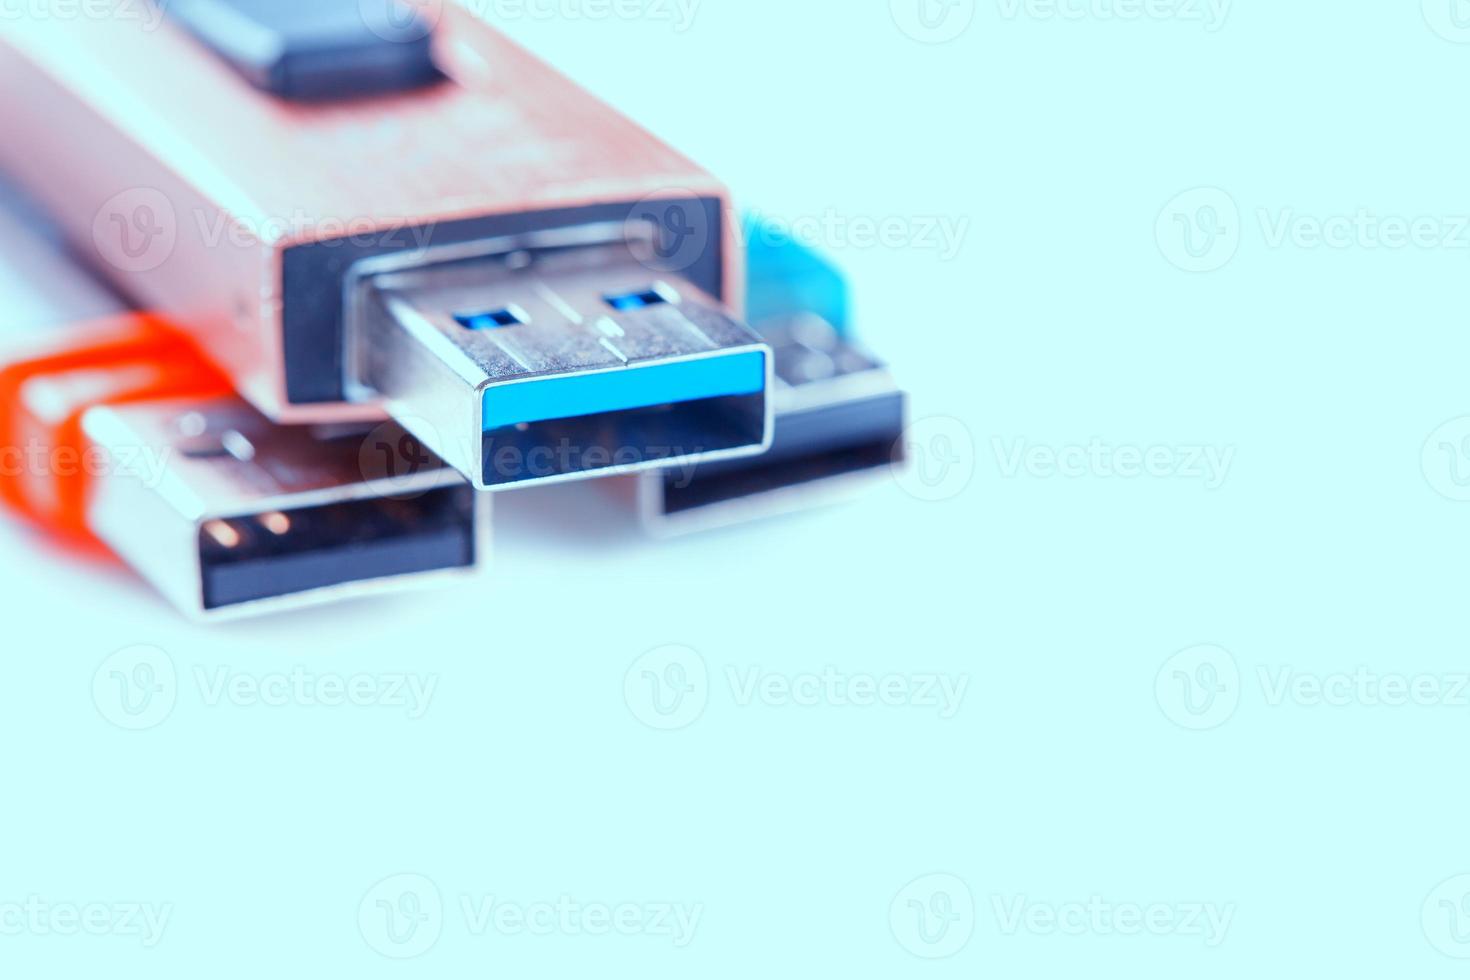 Detailed view of a black USB flash drive with a silver-blue connector. Photo on a white background